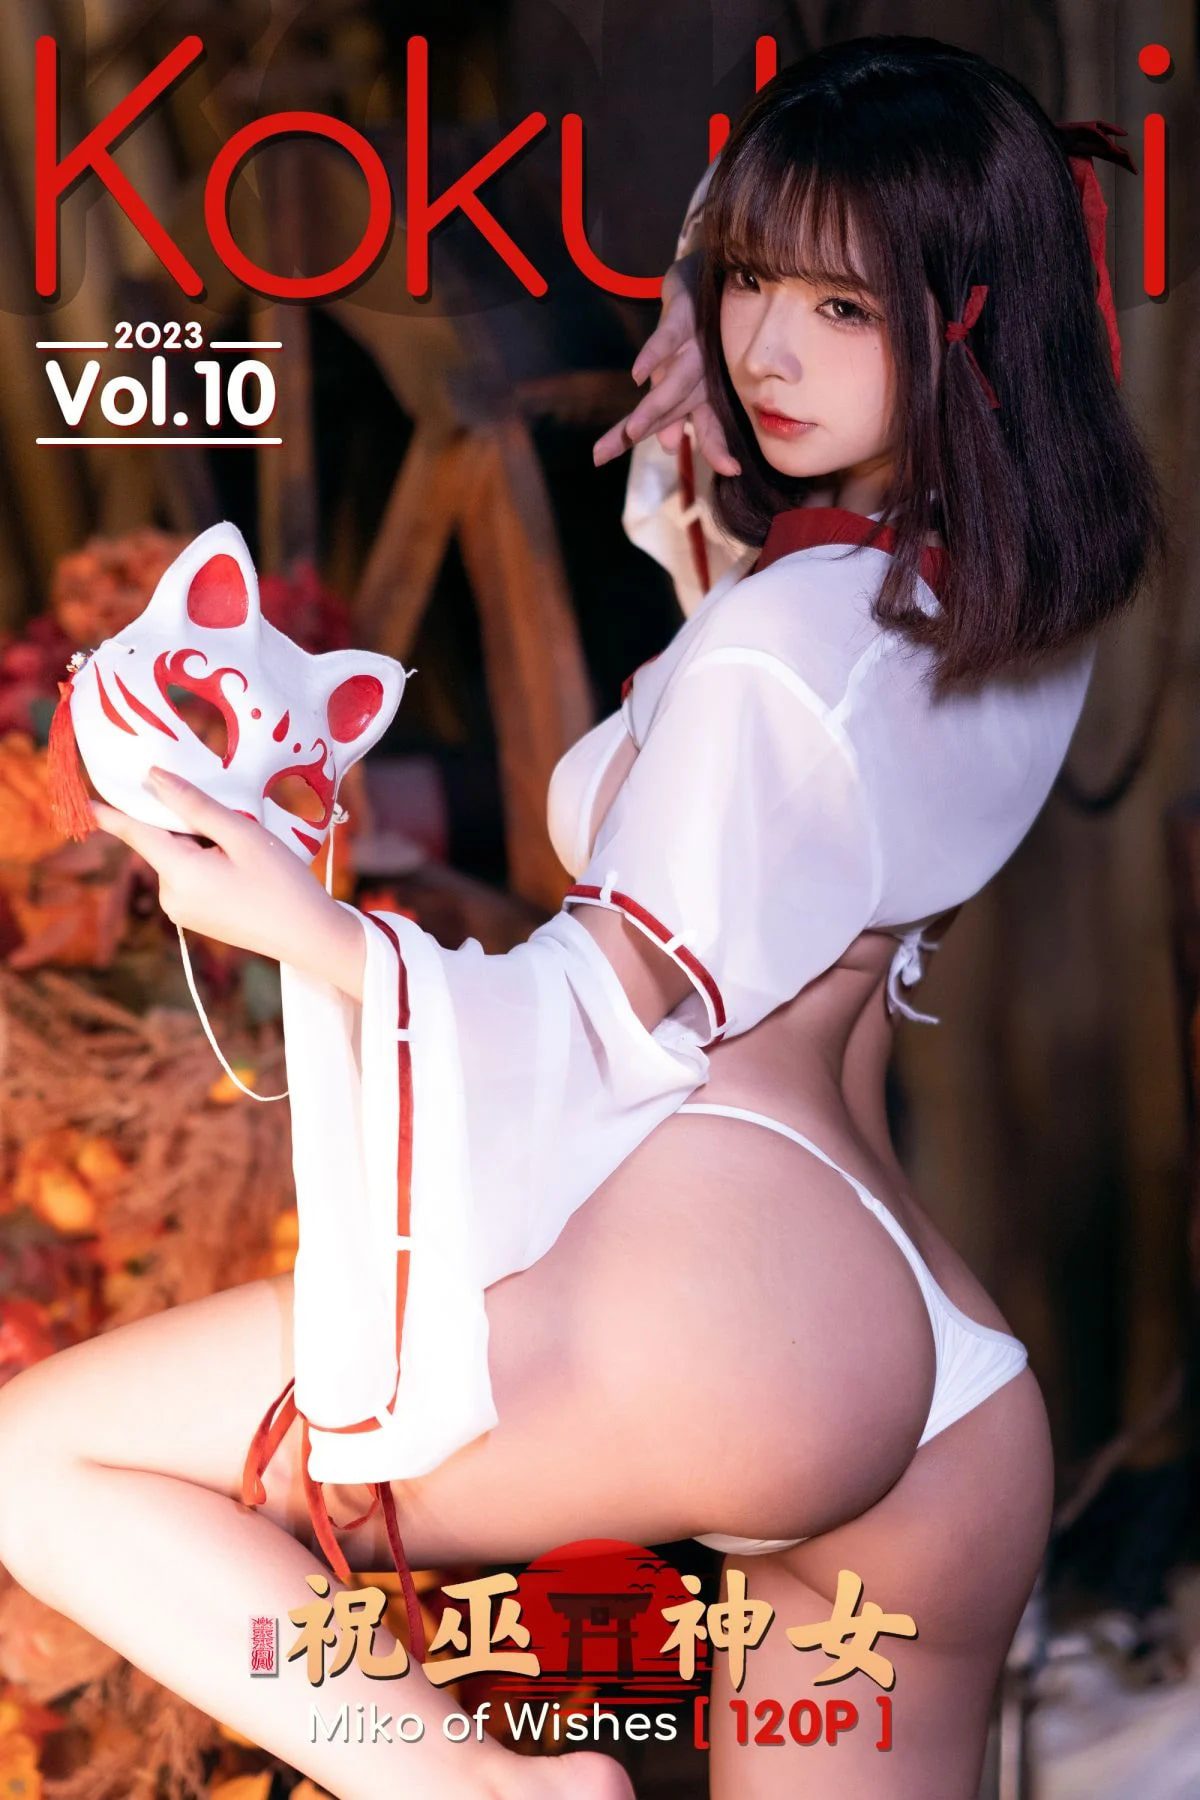 Coser@Kokuhui – 2023 Vol.10 Miko of Wishes 祝巫神女